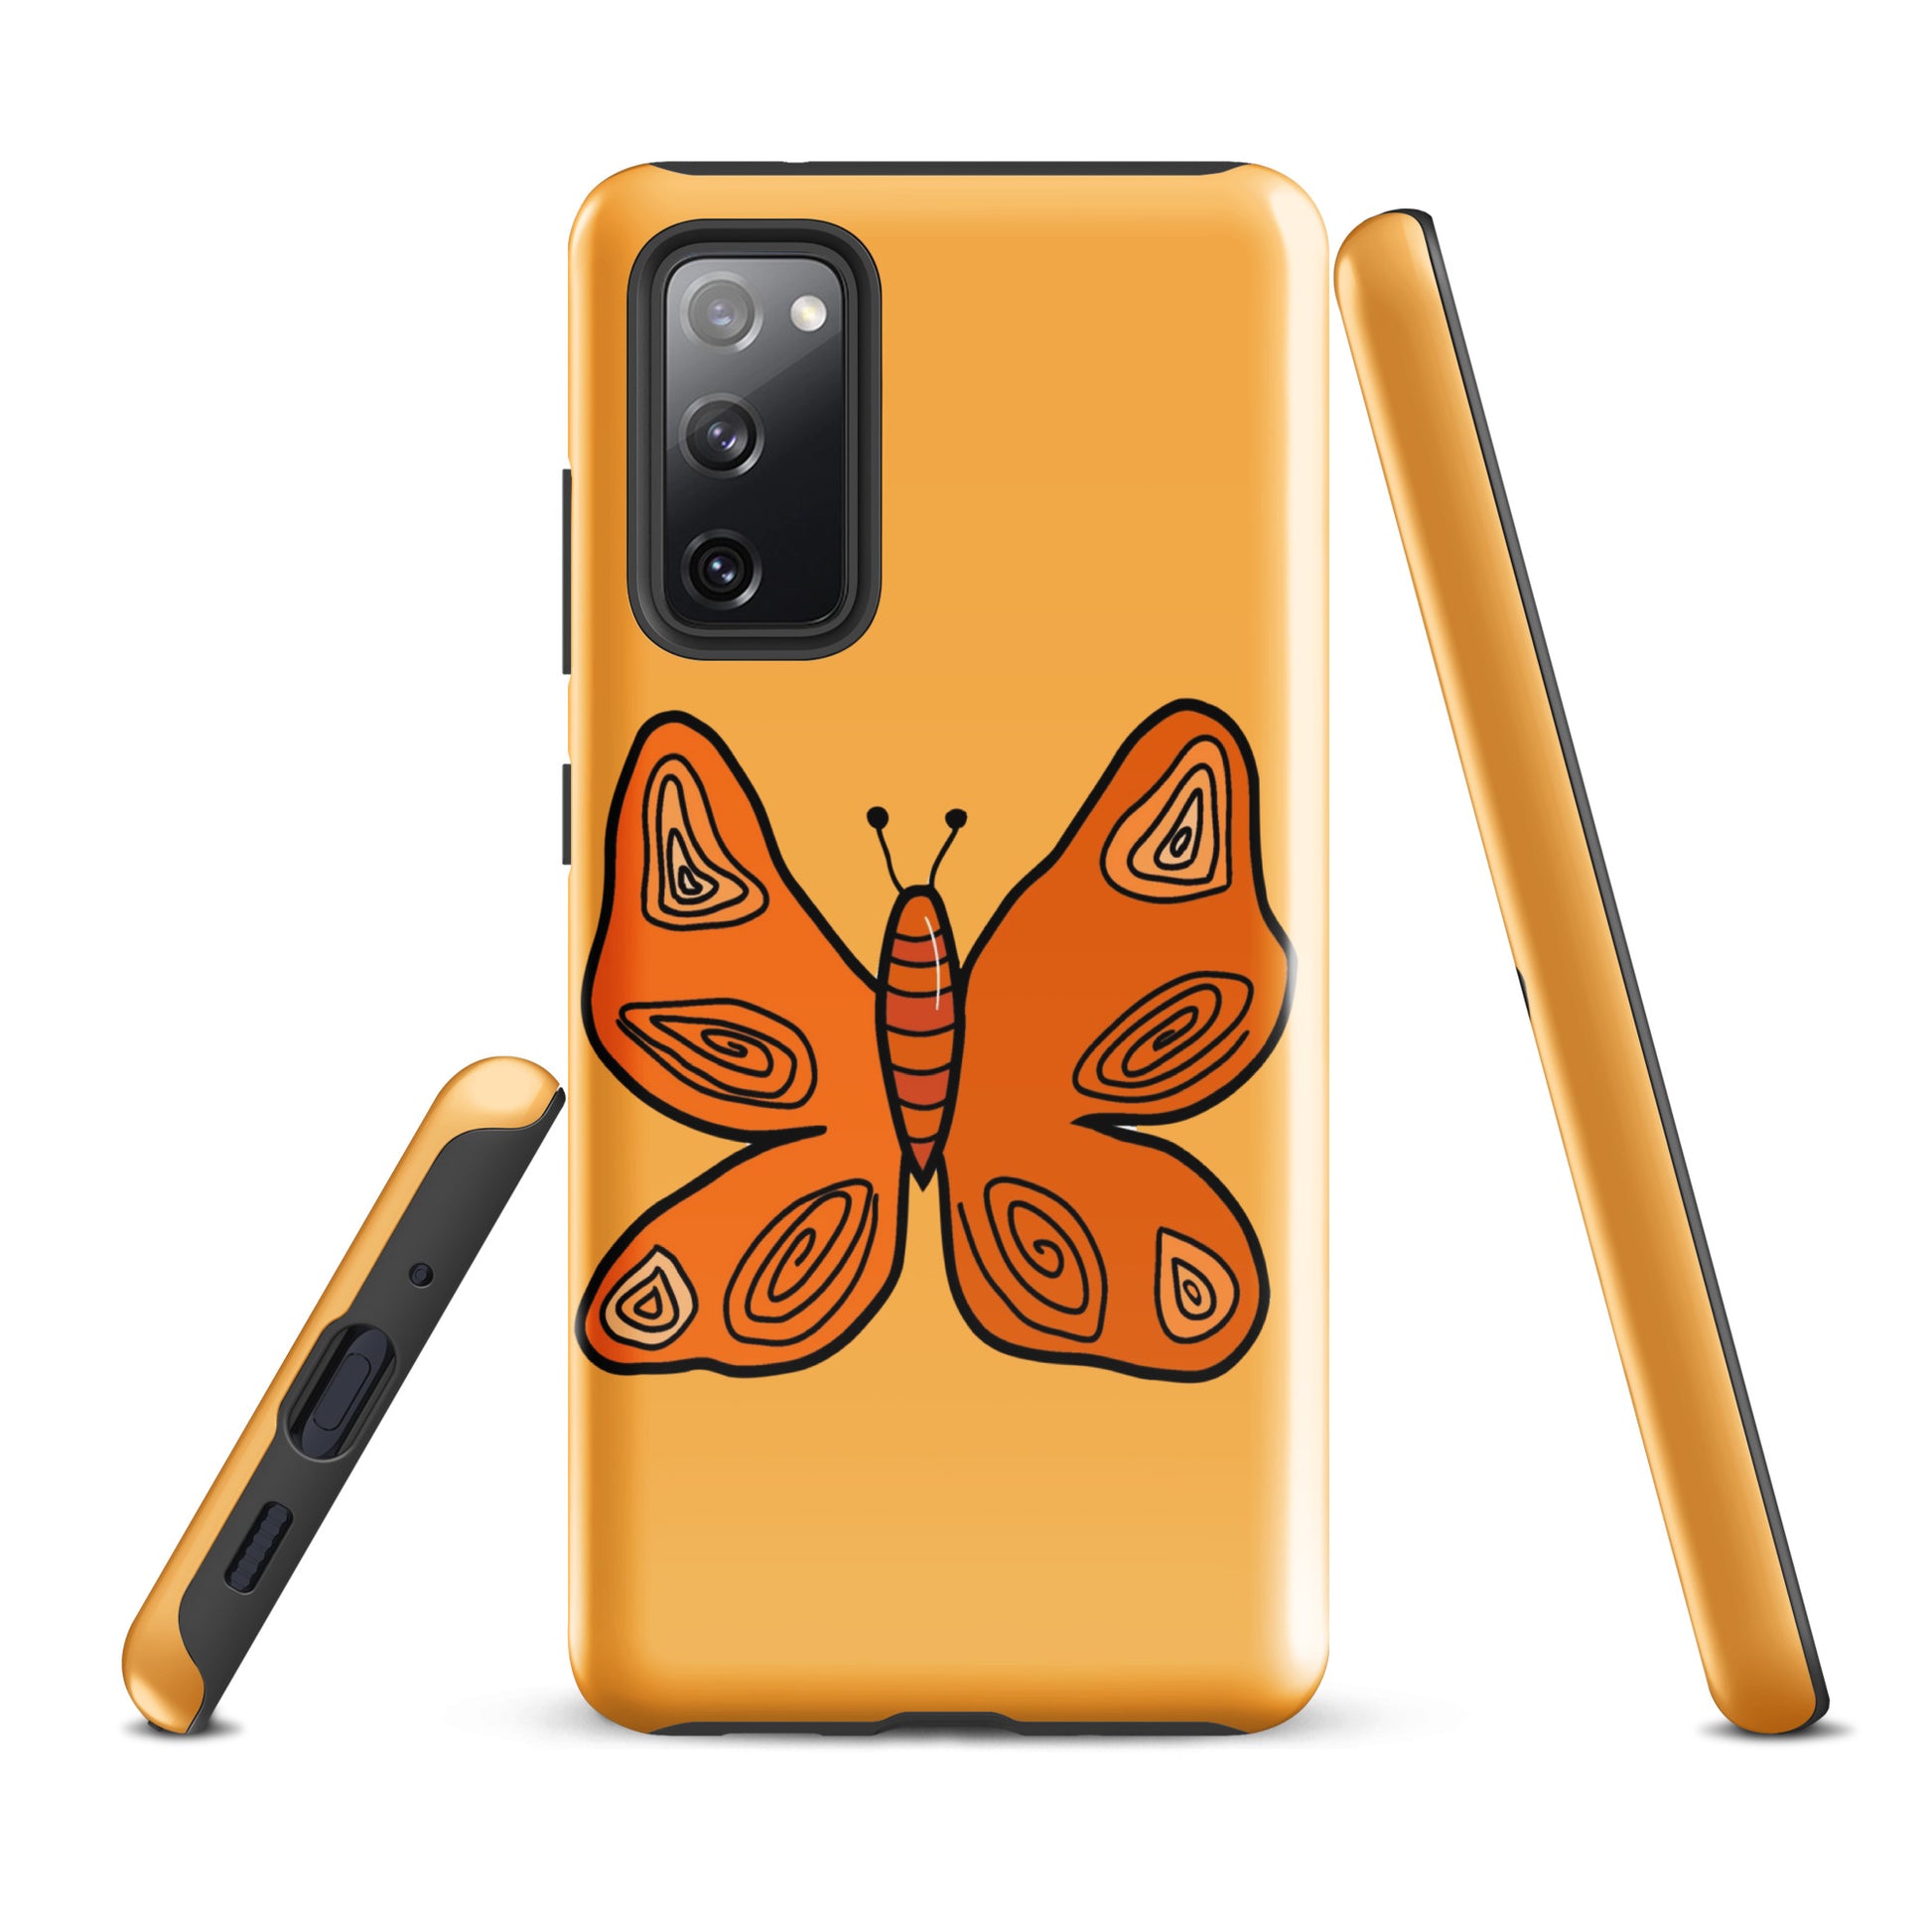 An Orange Butterfly Case for the Samsung Galaxy S20 FE